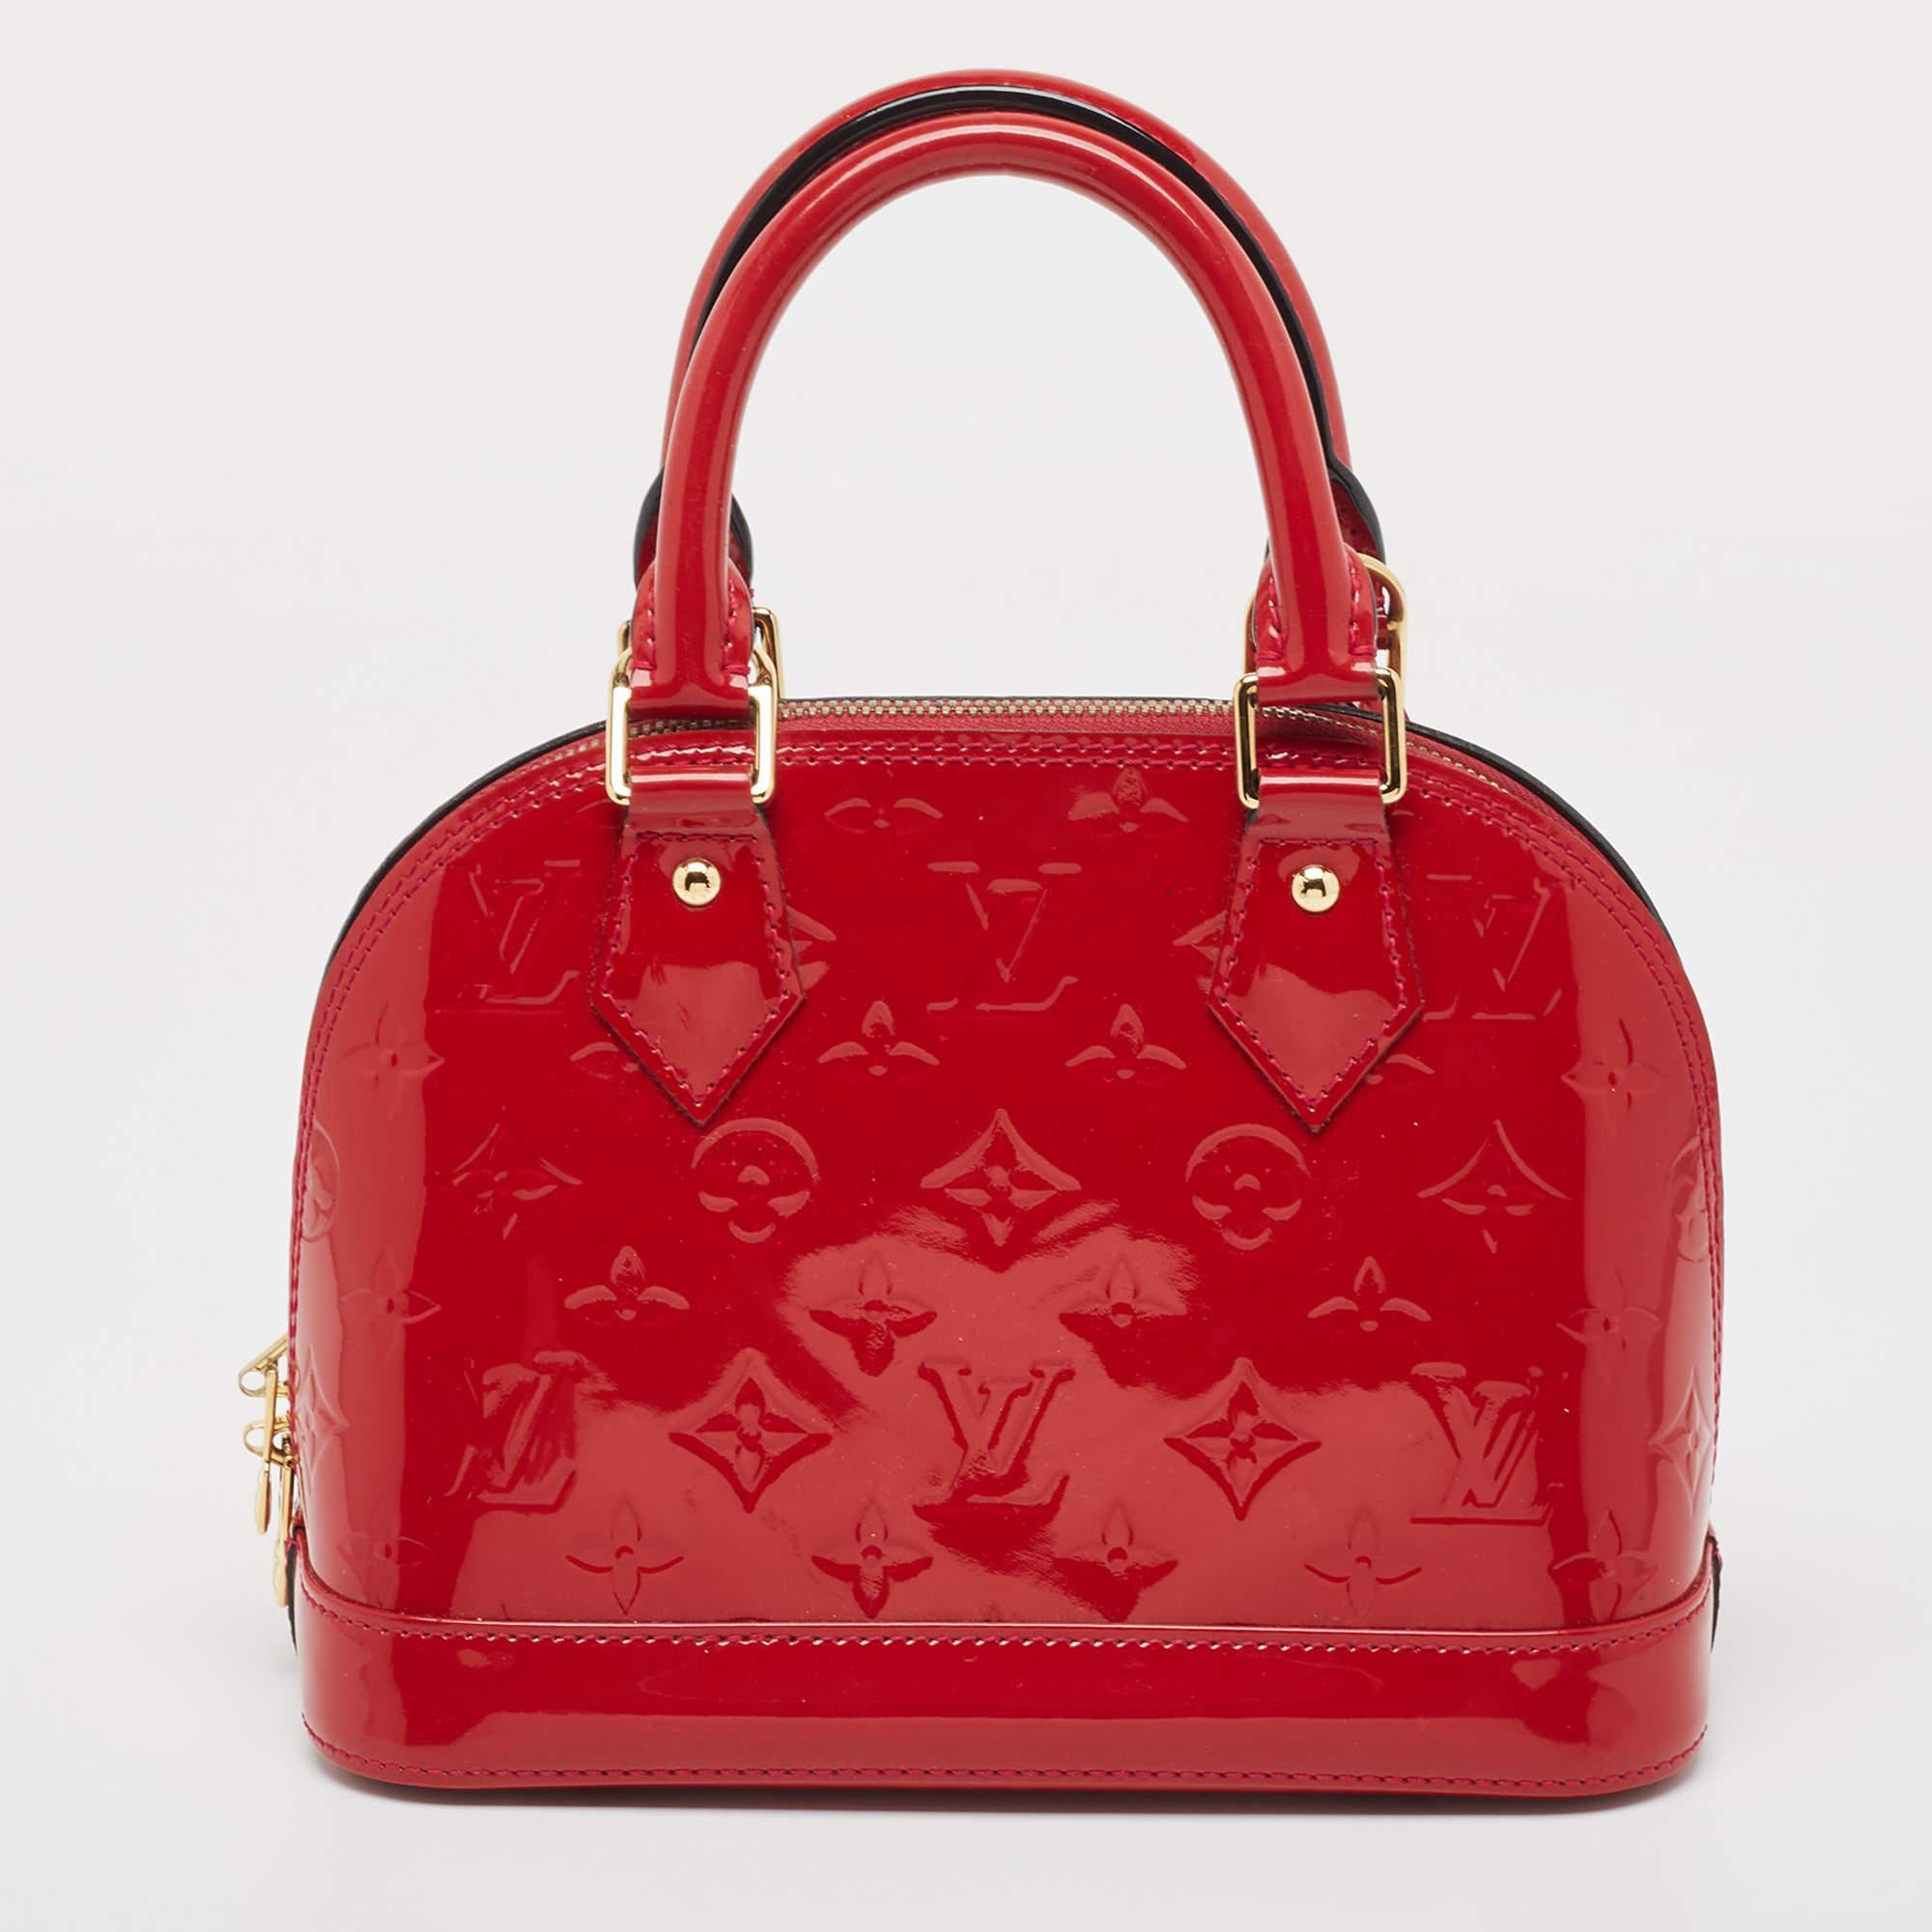 Introduced by Gaston-Louis Vuitton in 1934, the Alma is defined by elegant curves and notable features. From one of the most iconic collections of Louis Vuitton, this BB bag is imbued with exquisite craftsmanship and historic details. Constructed